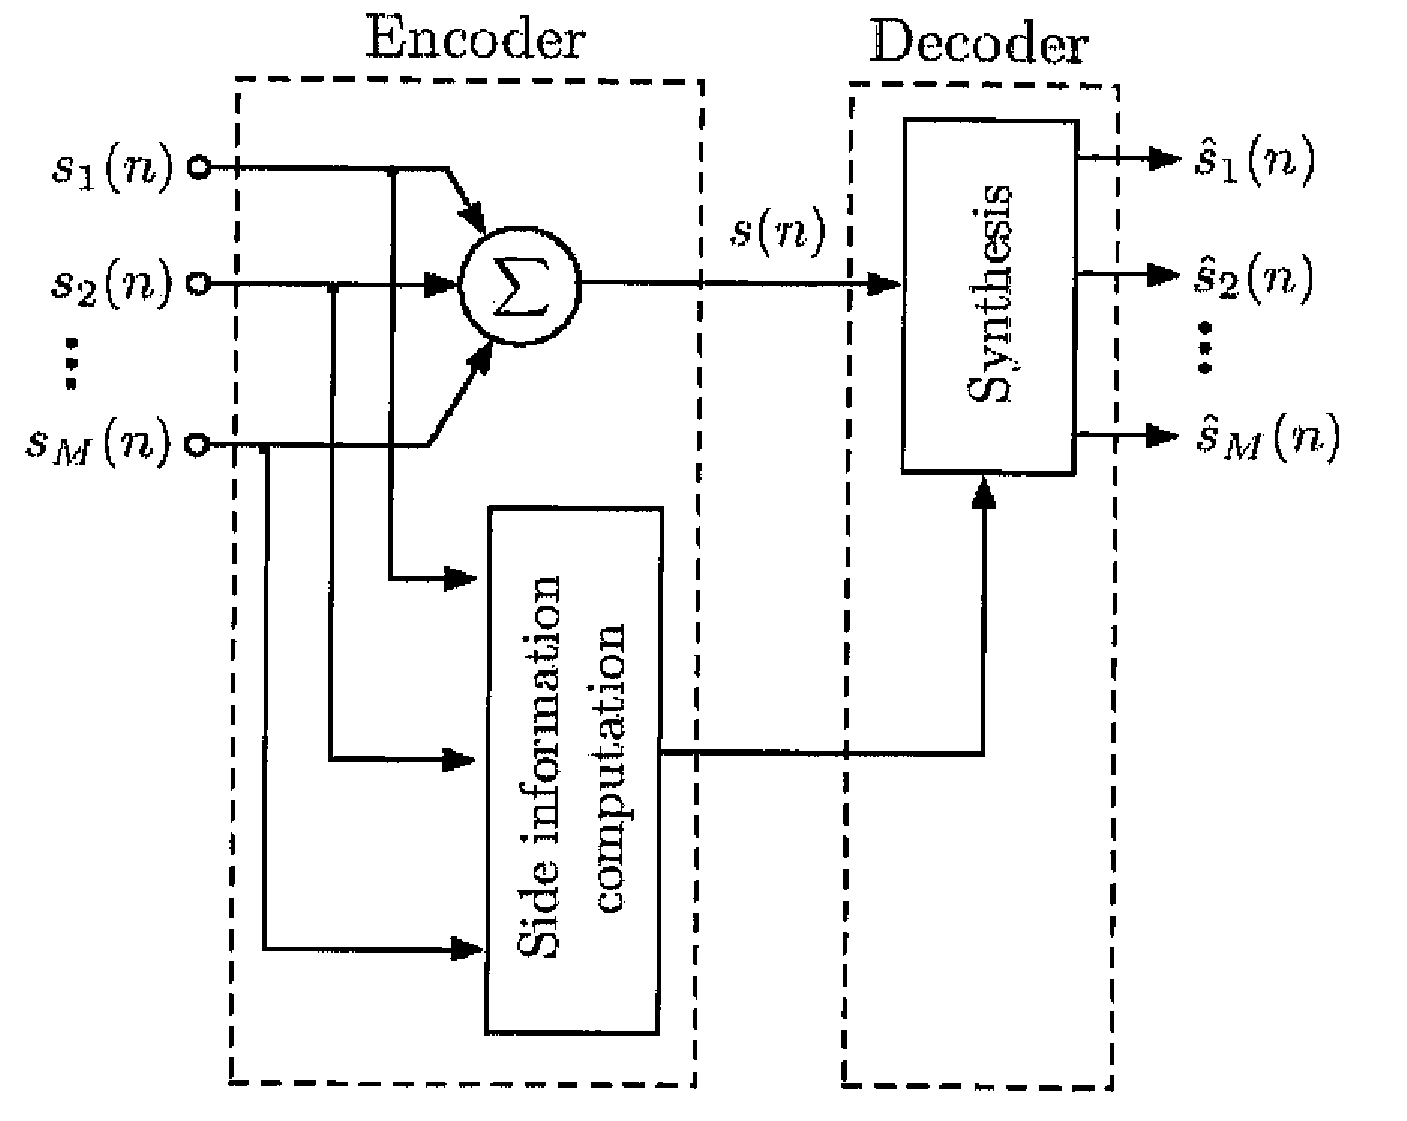 Parametric joint-coding of audio sources